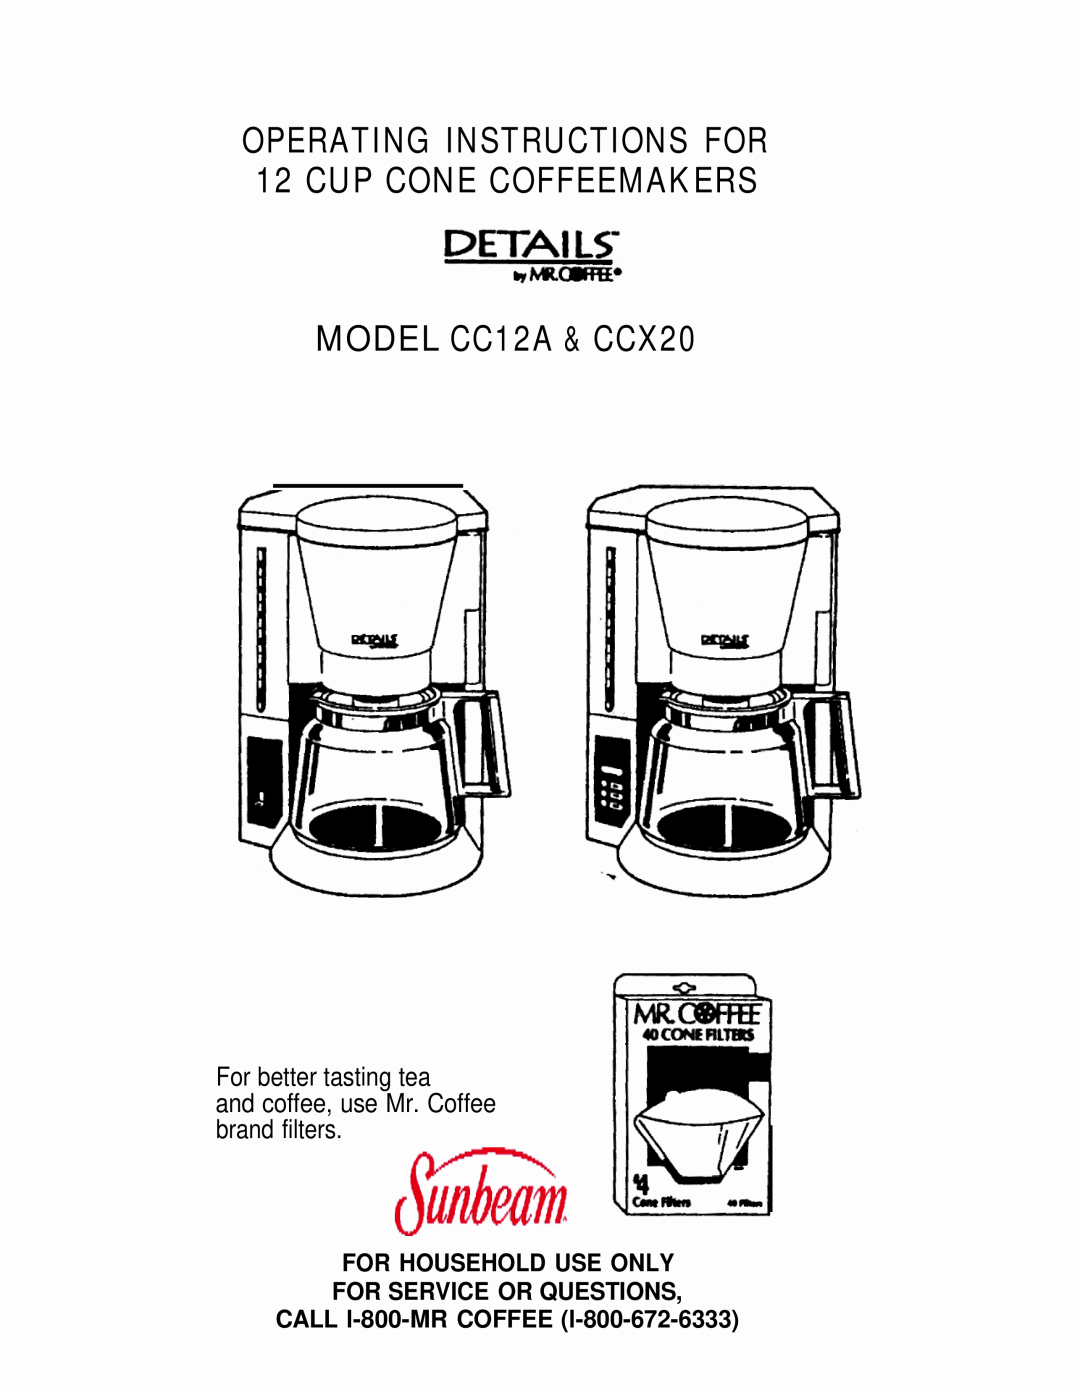 Mr. Coffee manual MODEL CC12A & CCX20, For better tasting tea, and coffee, use Mr. Coffee brand filters 